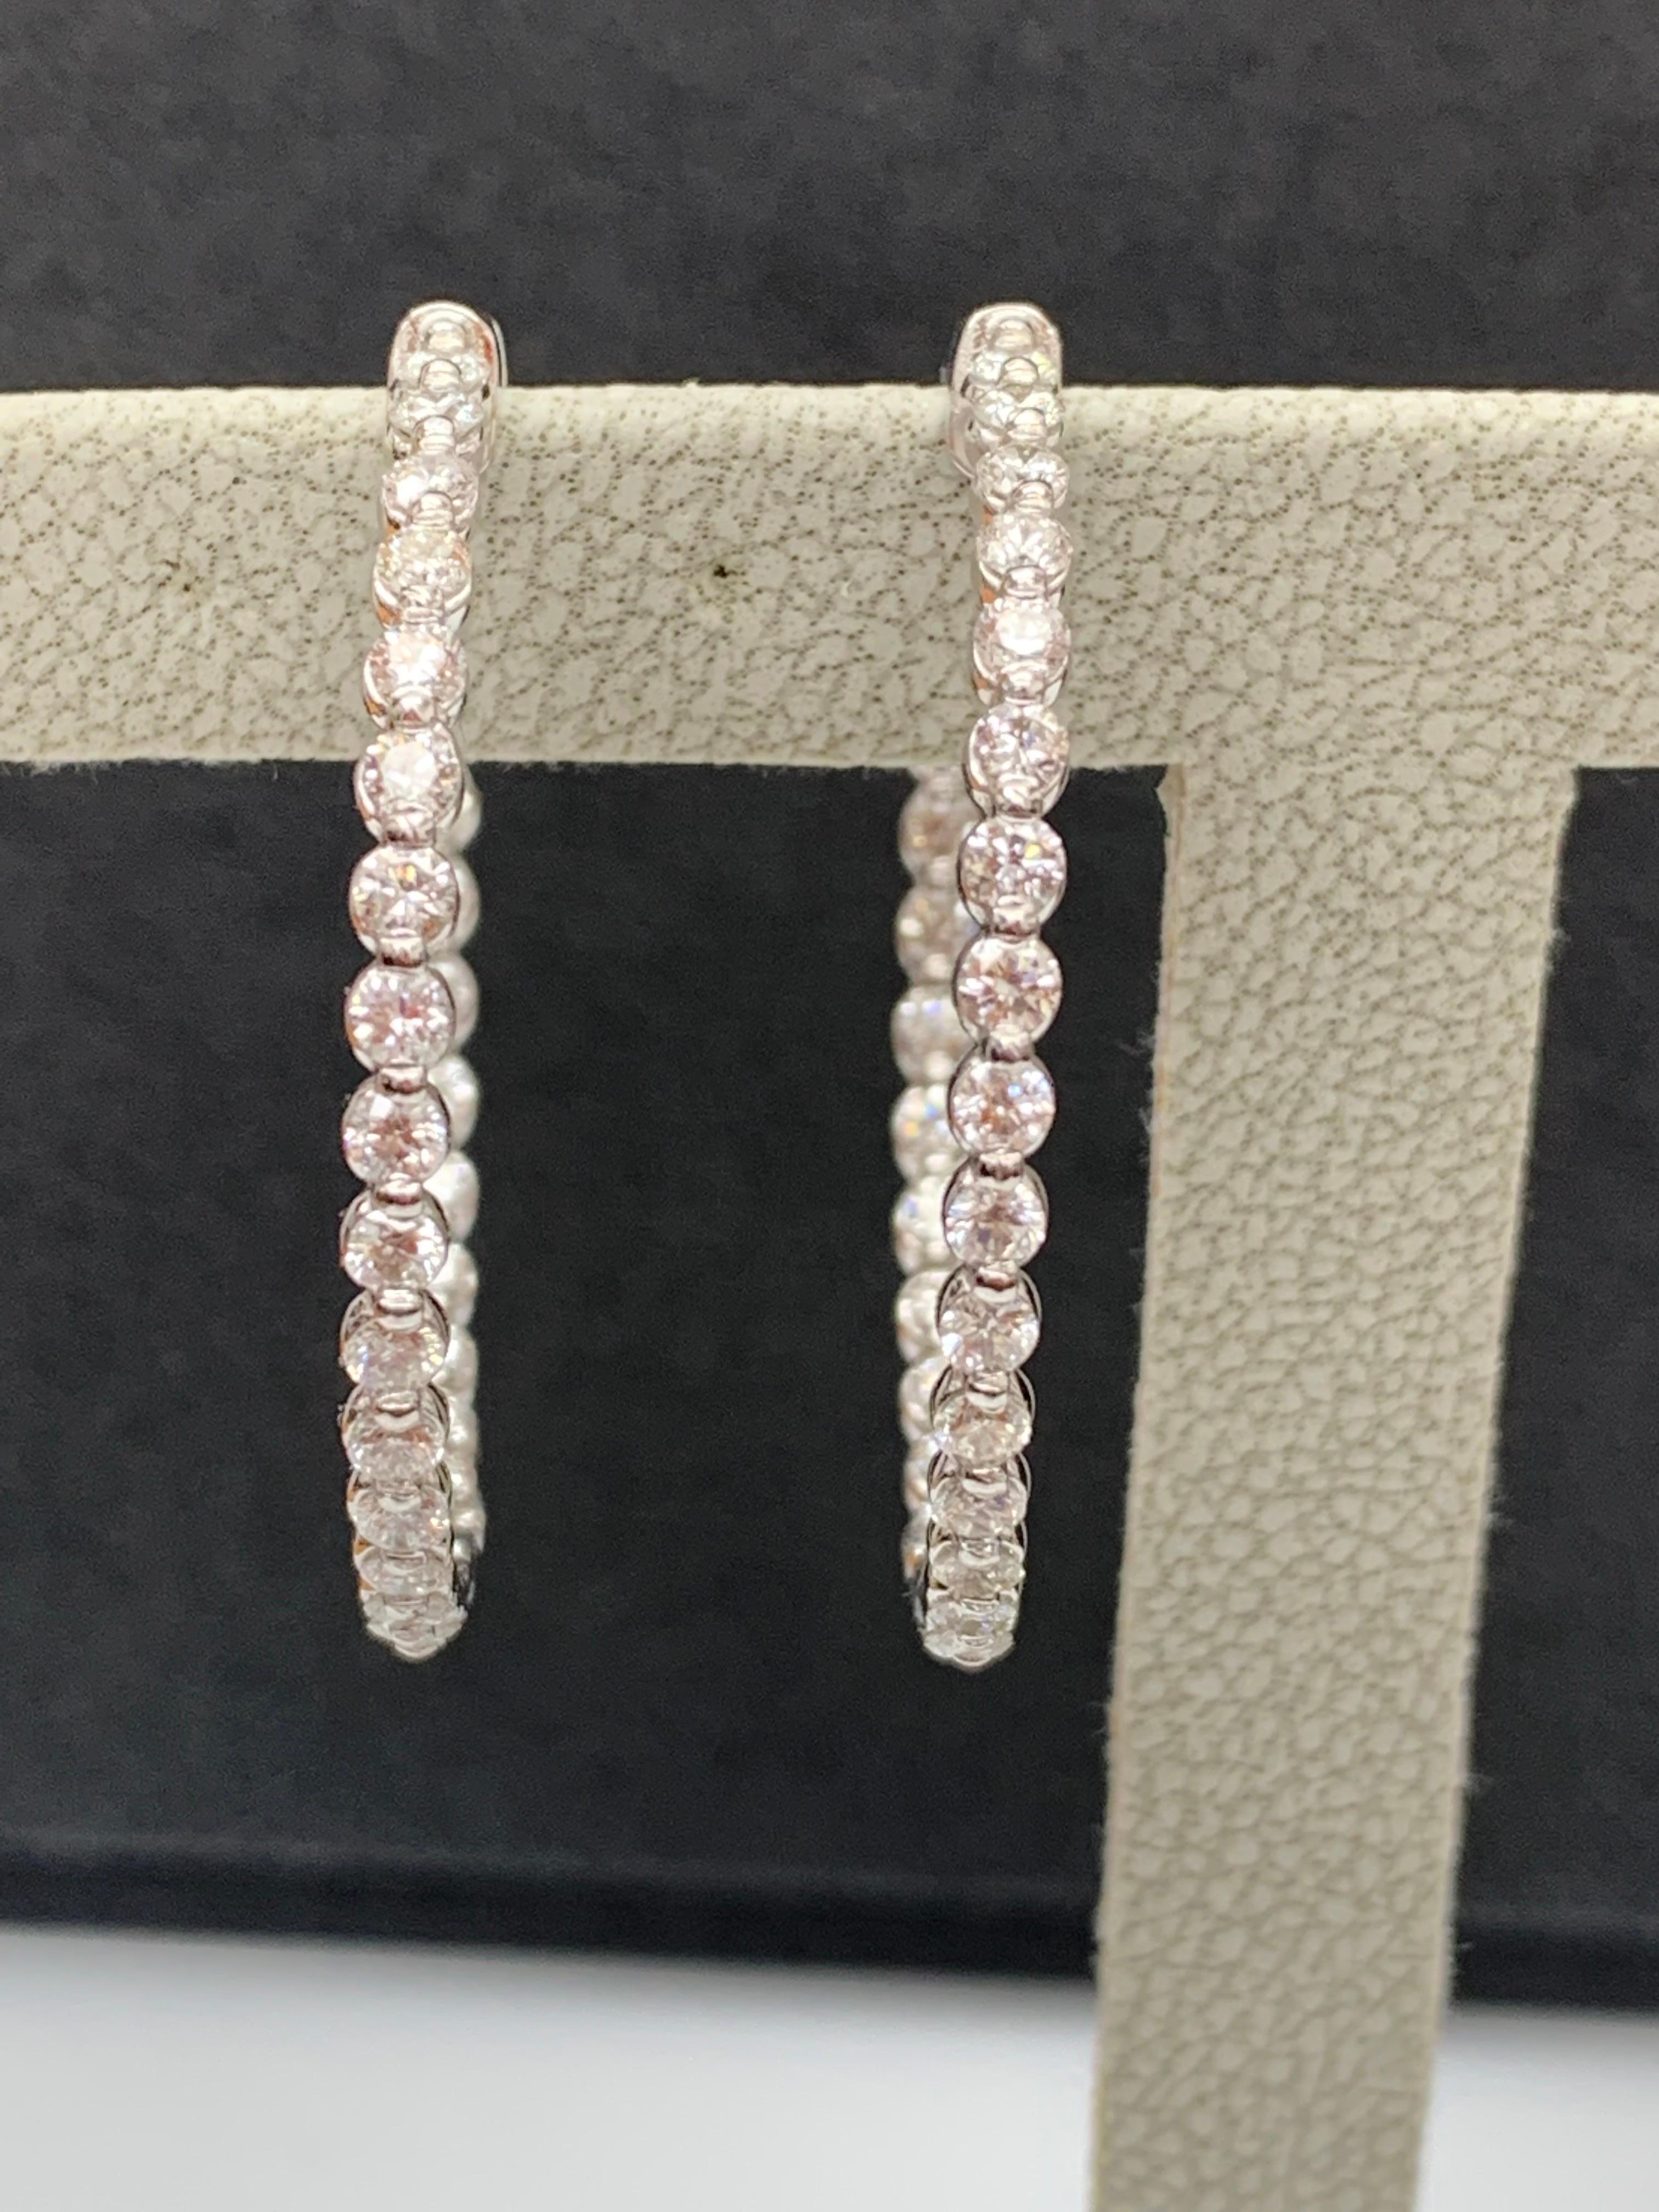 Gorgeous and classic diamond hoop earrings. Features dazzling brilliant cut round diamonds set in shared prongs to maximize the brilliance of the diamonds. The total weight of the 60 diamonds is 2.01 carats. Made in 14k white gold. 